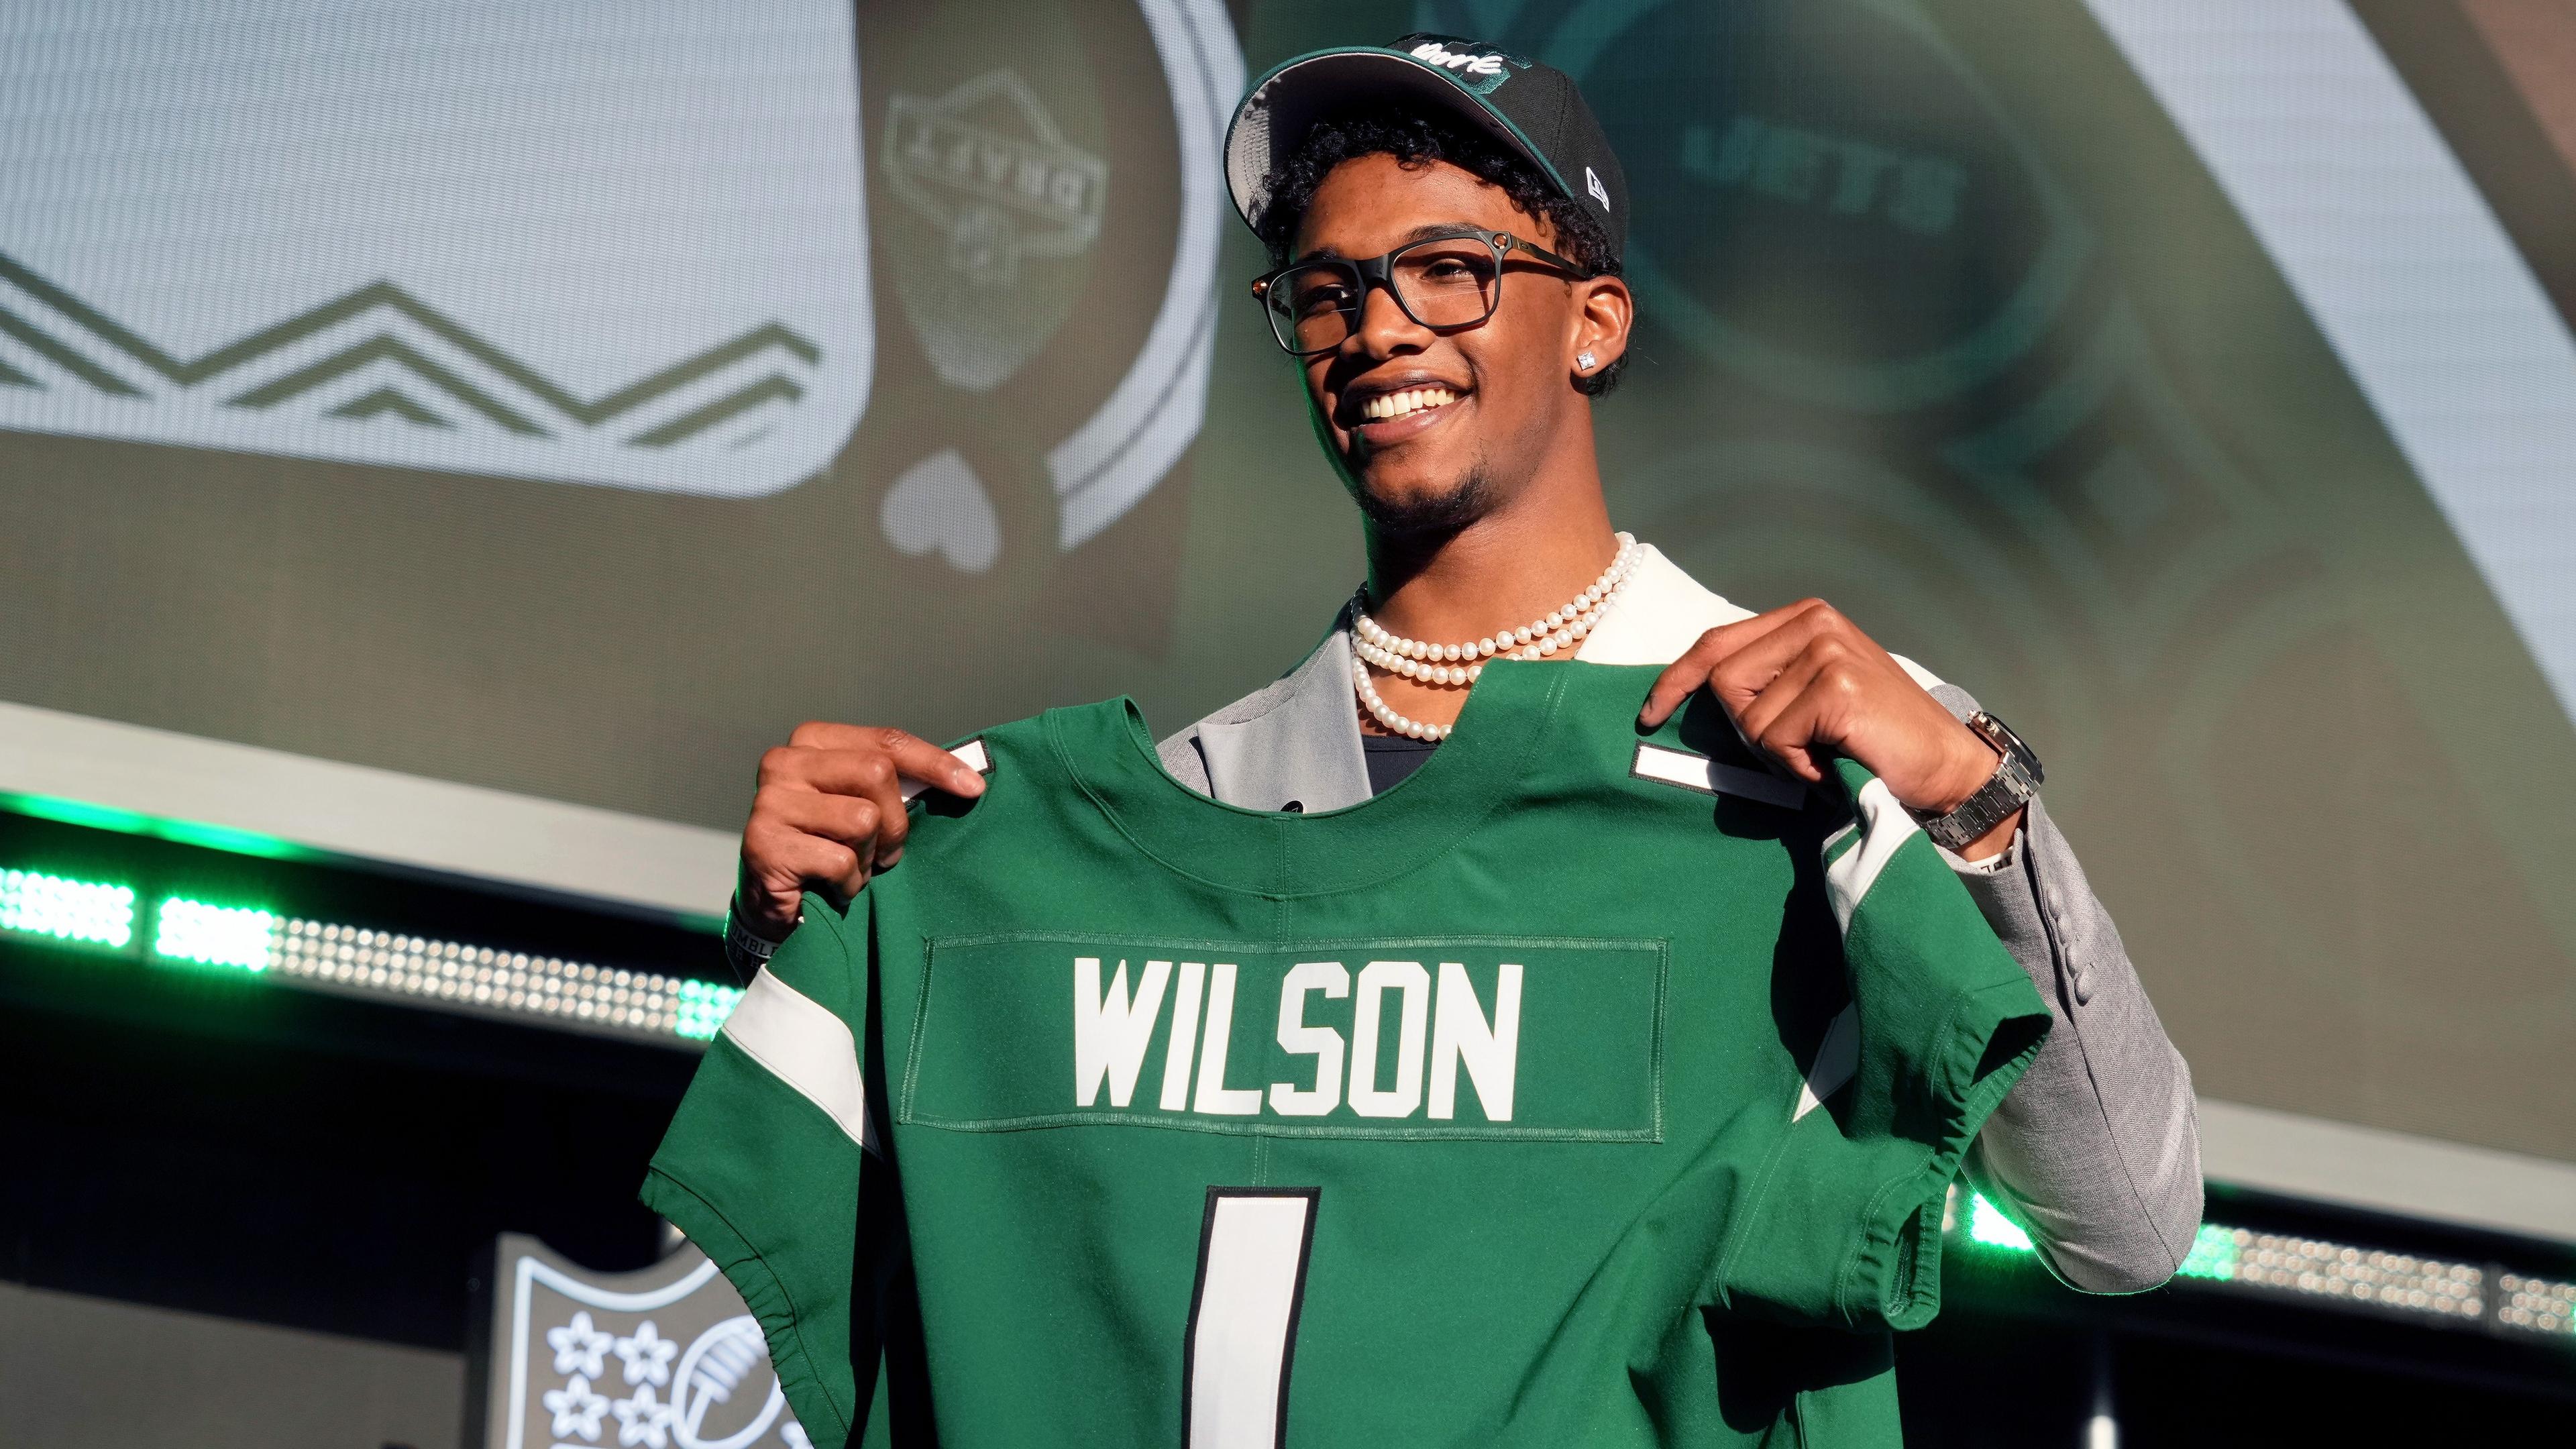 Apr 28, 2022; Las Vegas, NV, USA; Ohio State wide receiver Garrett Wilson after being selected as the tenth overall pick to the New York Jets during the first round of the 2022 NFL Draft at the NFL Draft Theater. Mandatory Credit: Kirby Lee-USA TODAY Sports / Kirby Lee-USA TODAY Sports